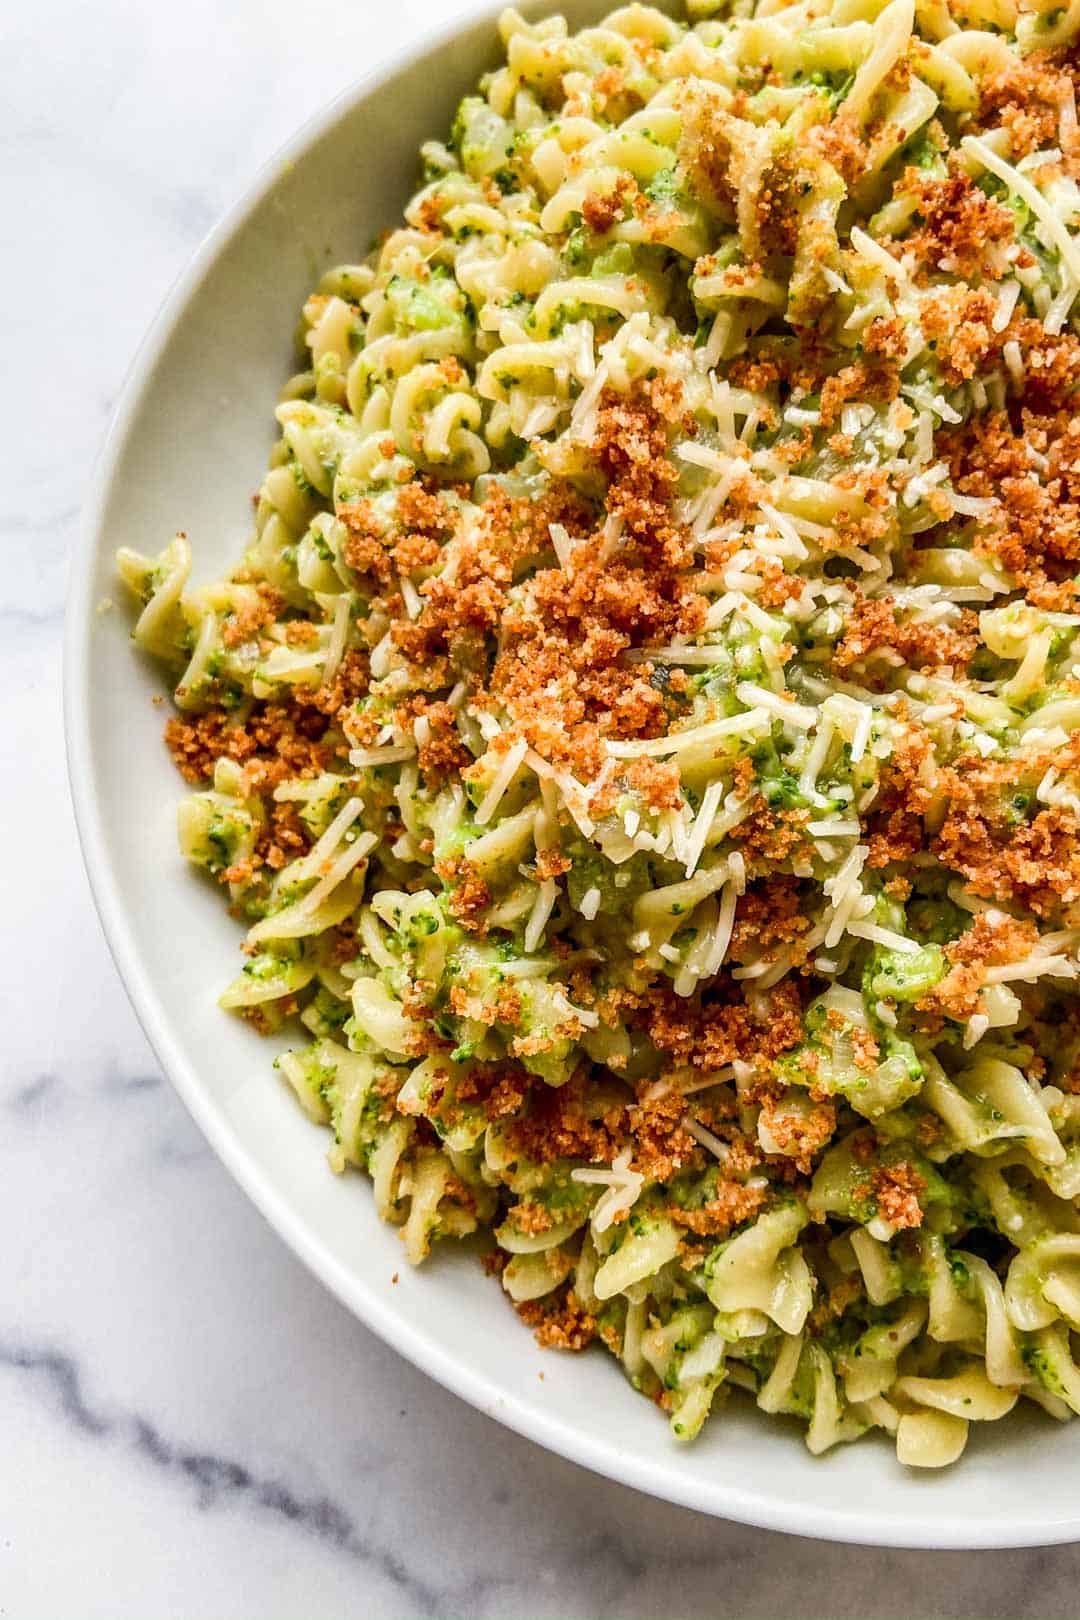 Broccoli pasta topped with panko breadcrumbs.